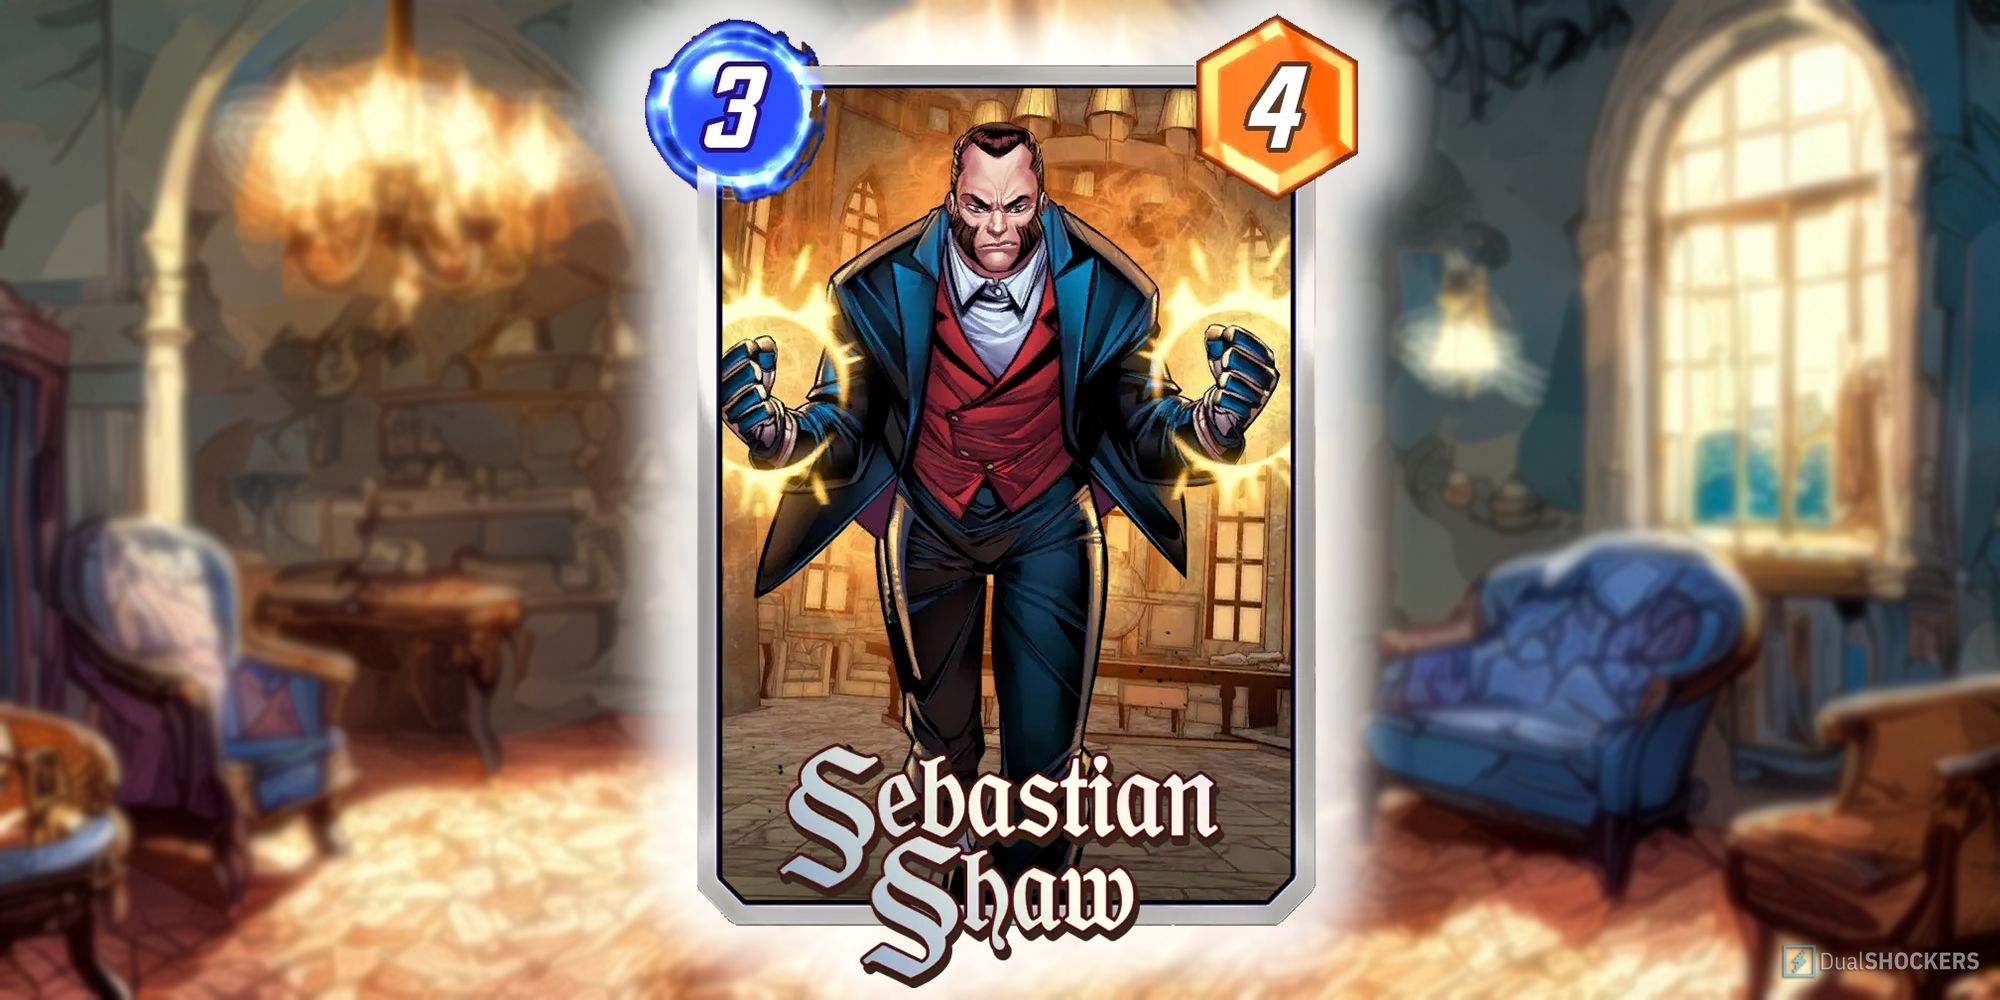 Marvel Snap's Sebastian Shaw card with a manor-like background.